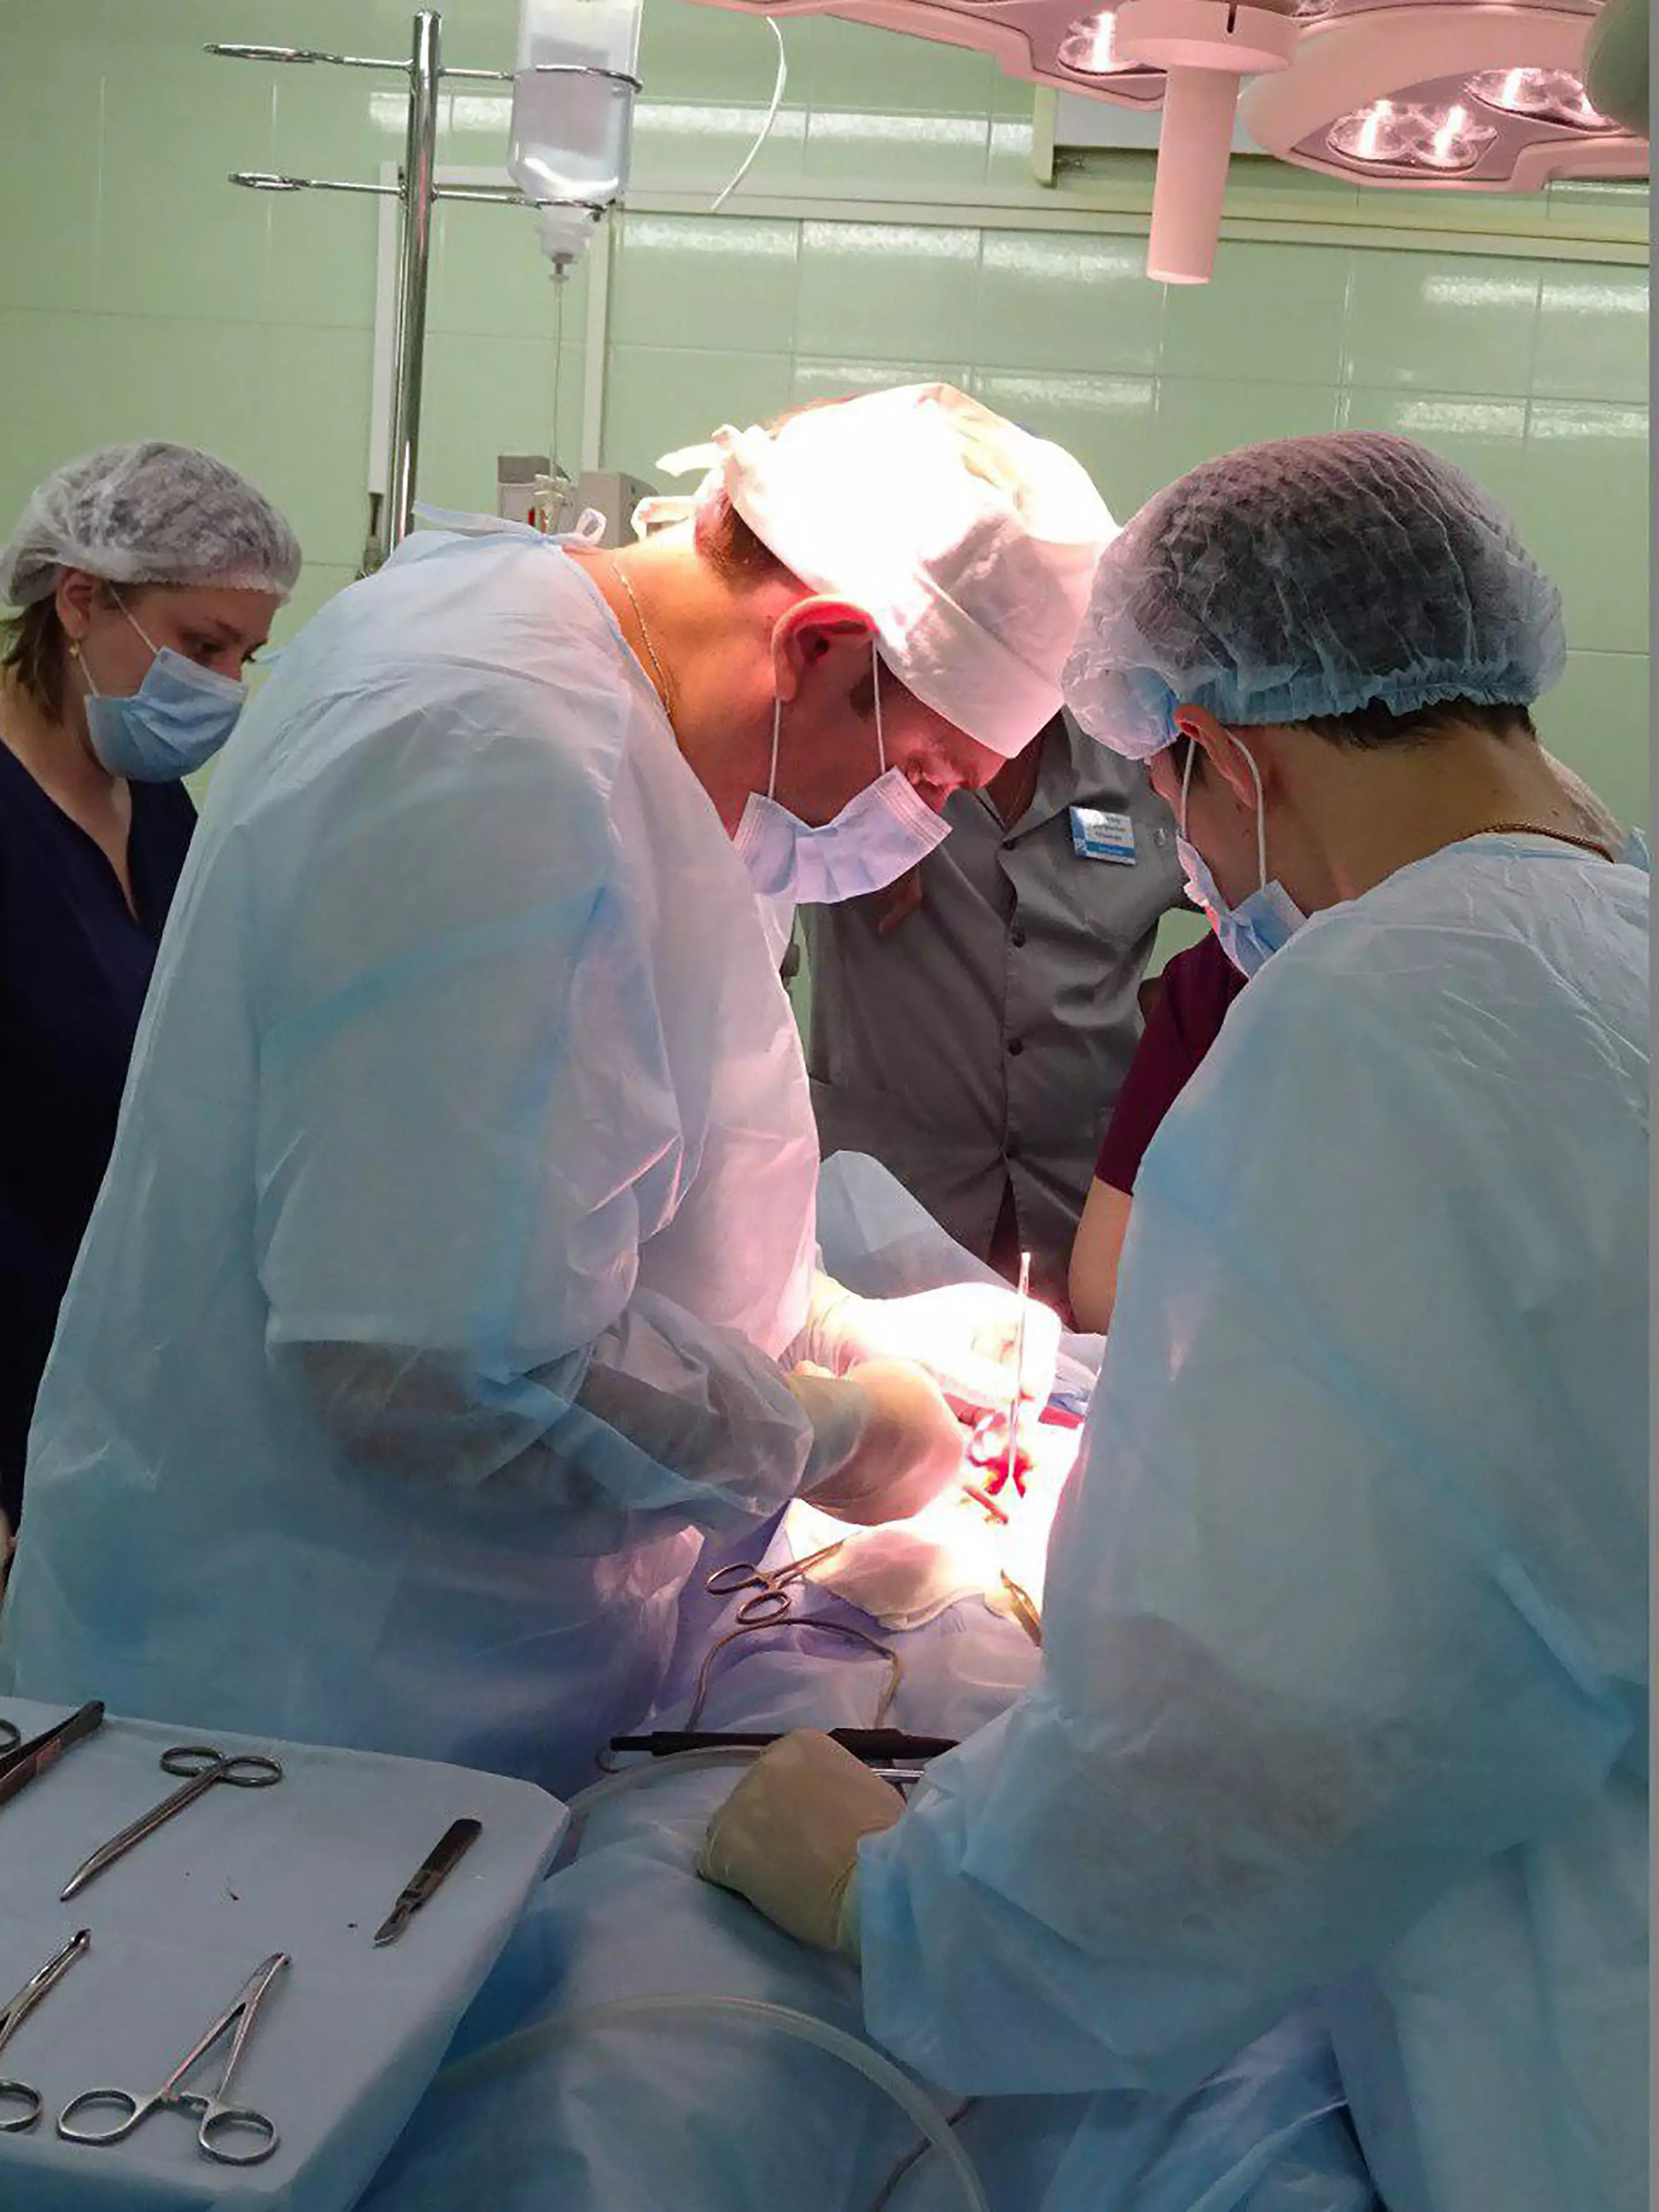 Doctors performed urgent surgery on the girl.